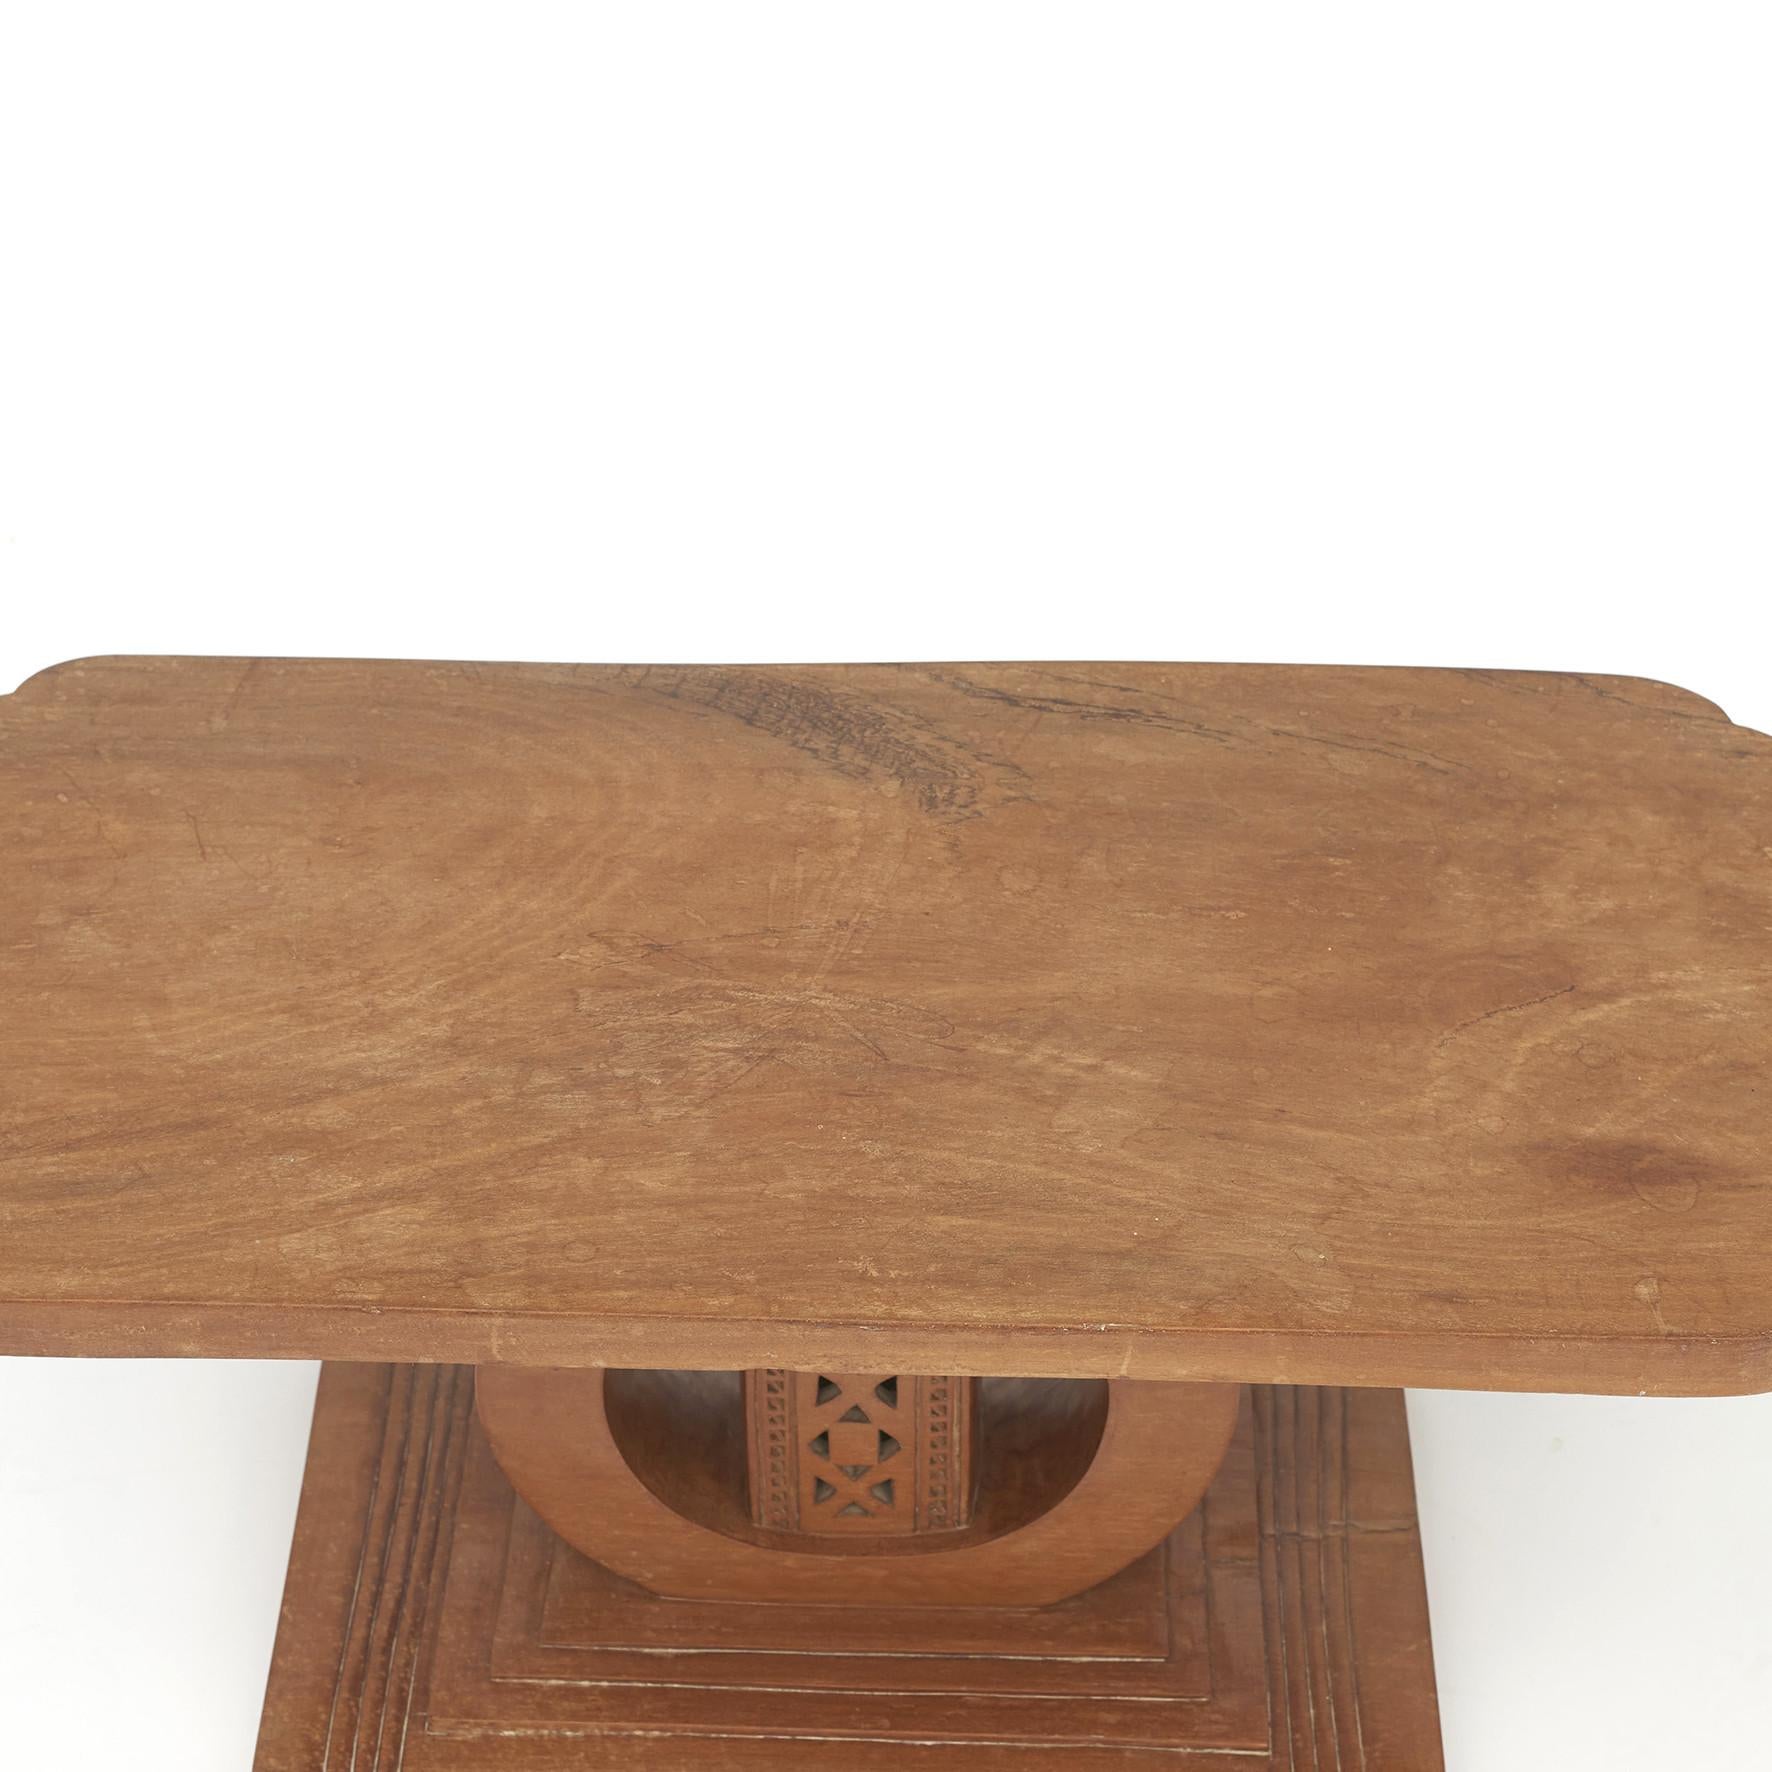 Ashanti coffee table or end table from Ghana. Made in hardwood, circa 1950.
Carved with geometric decoration.
Likely a stool made into a table.
The Ashanti Empire was a pre-colonial West African state that emerged in the 17th century in what is